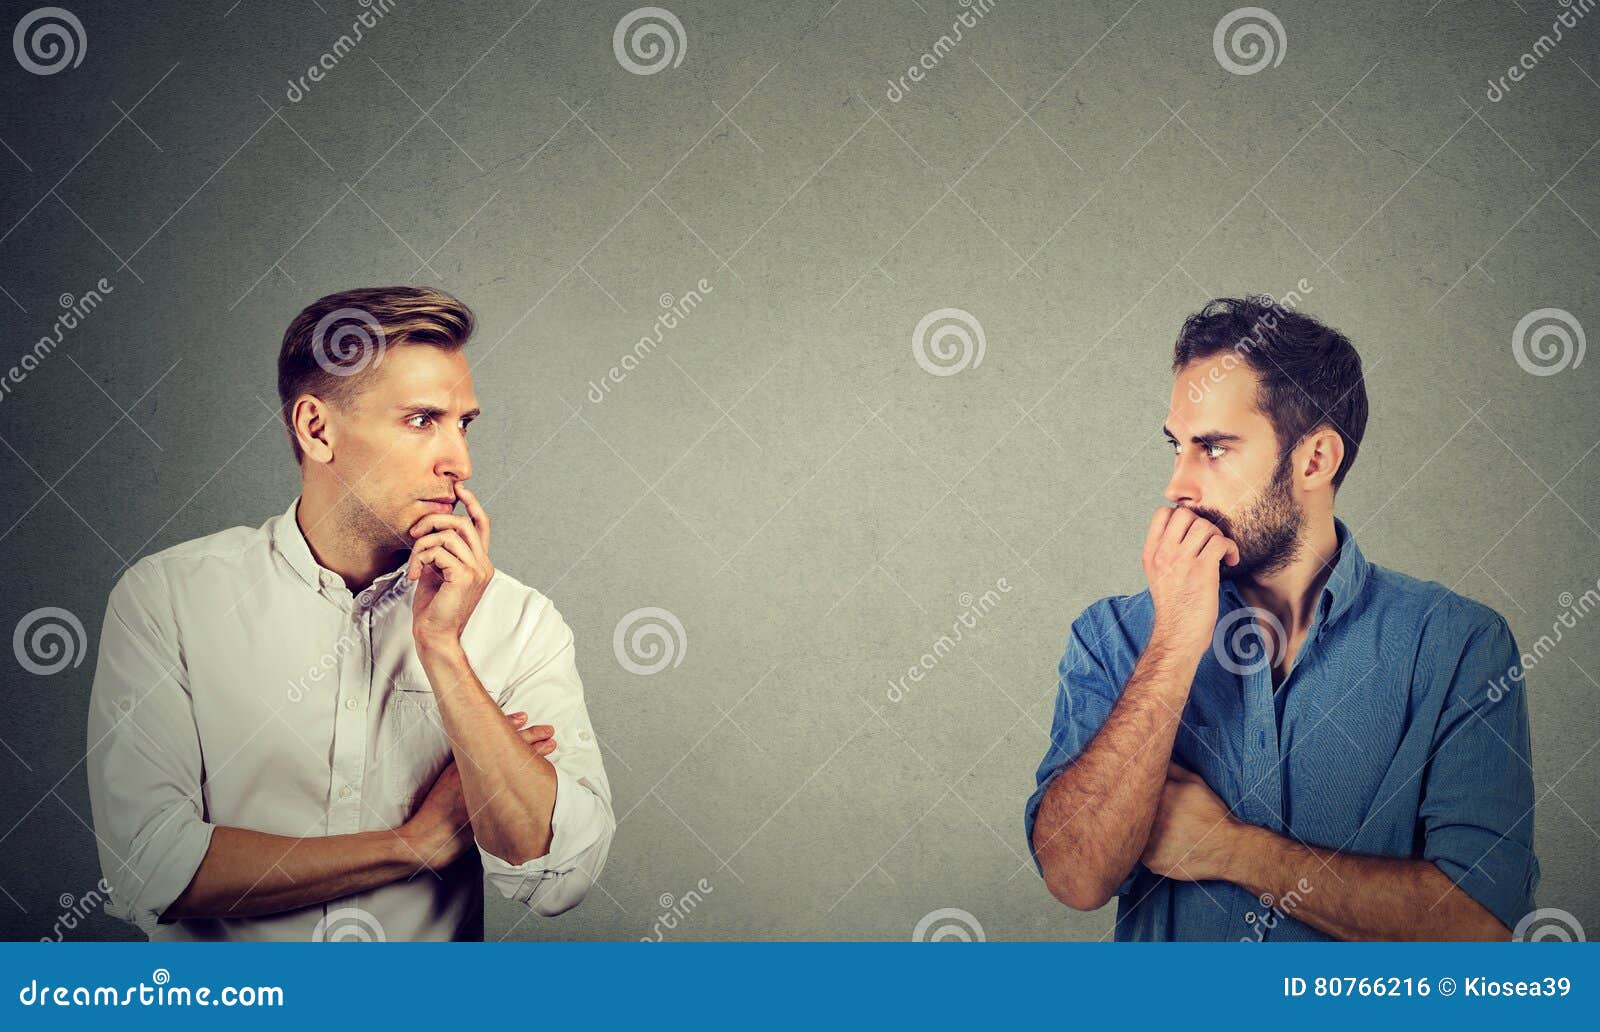 profile of two preoccupied businessmen looking at each other